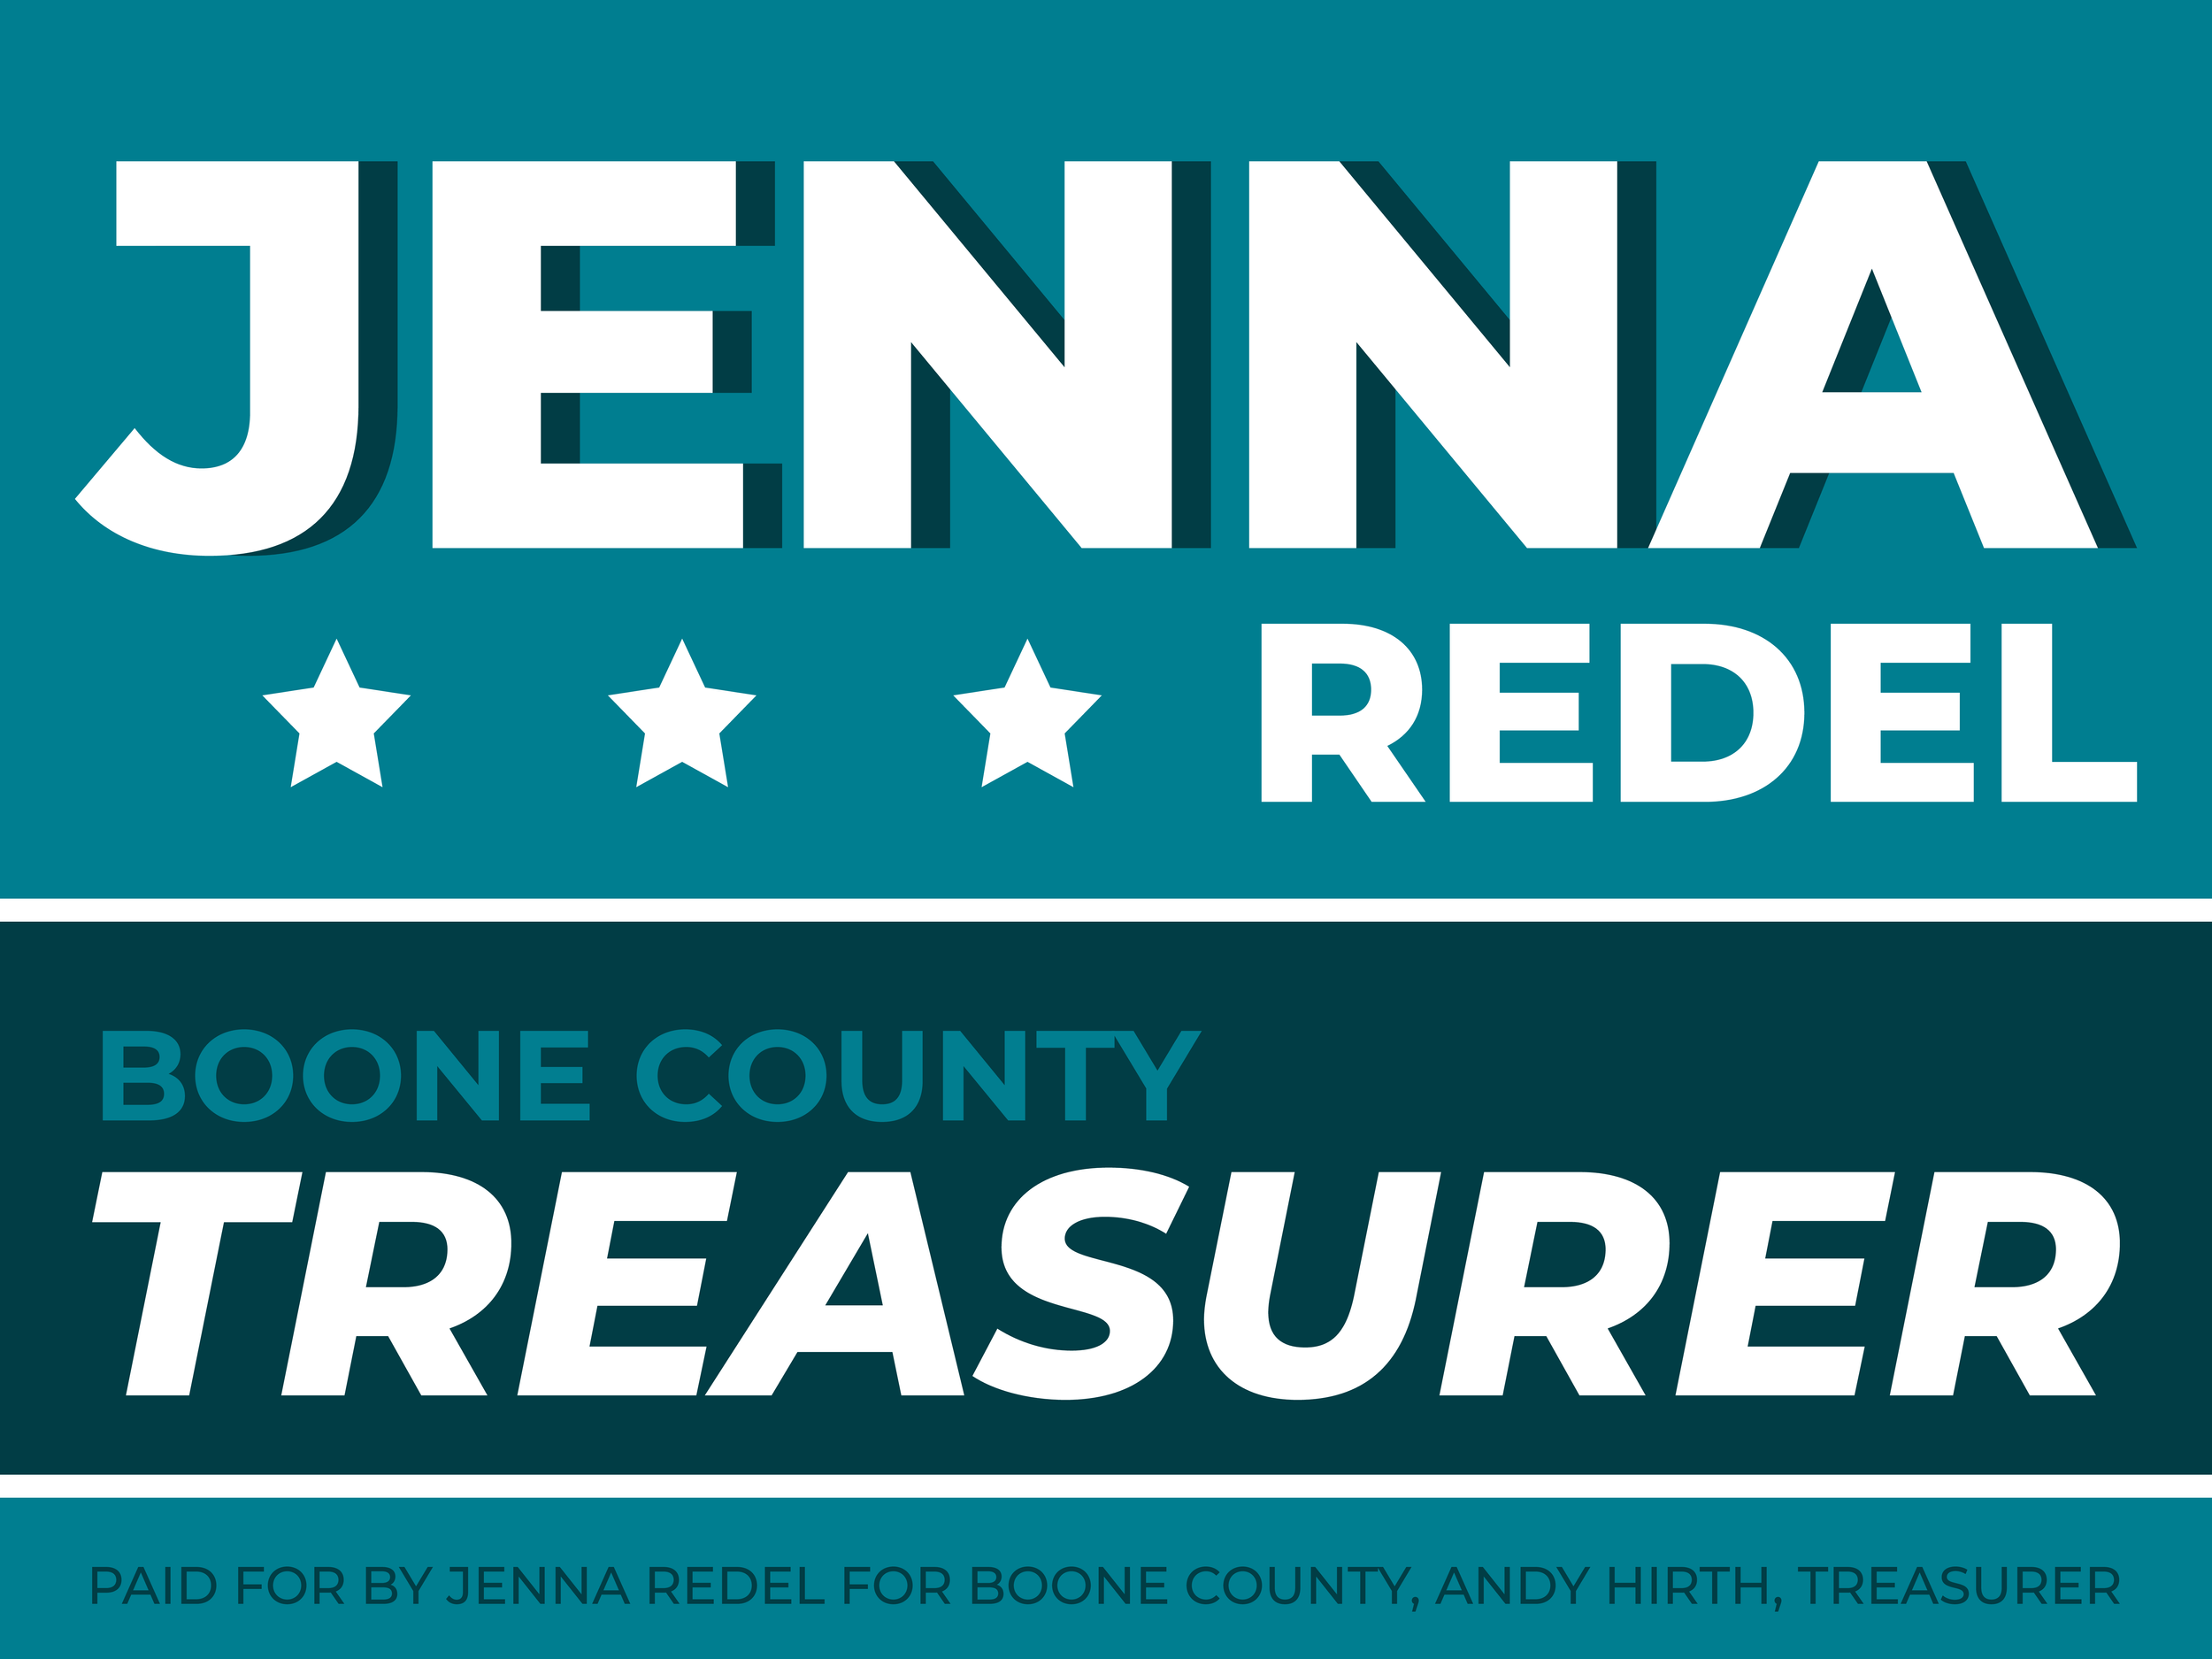 JENNA REDEL FOR BOONE COUNTY TREASURER